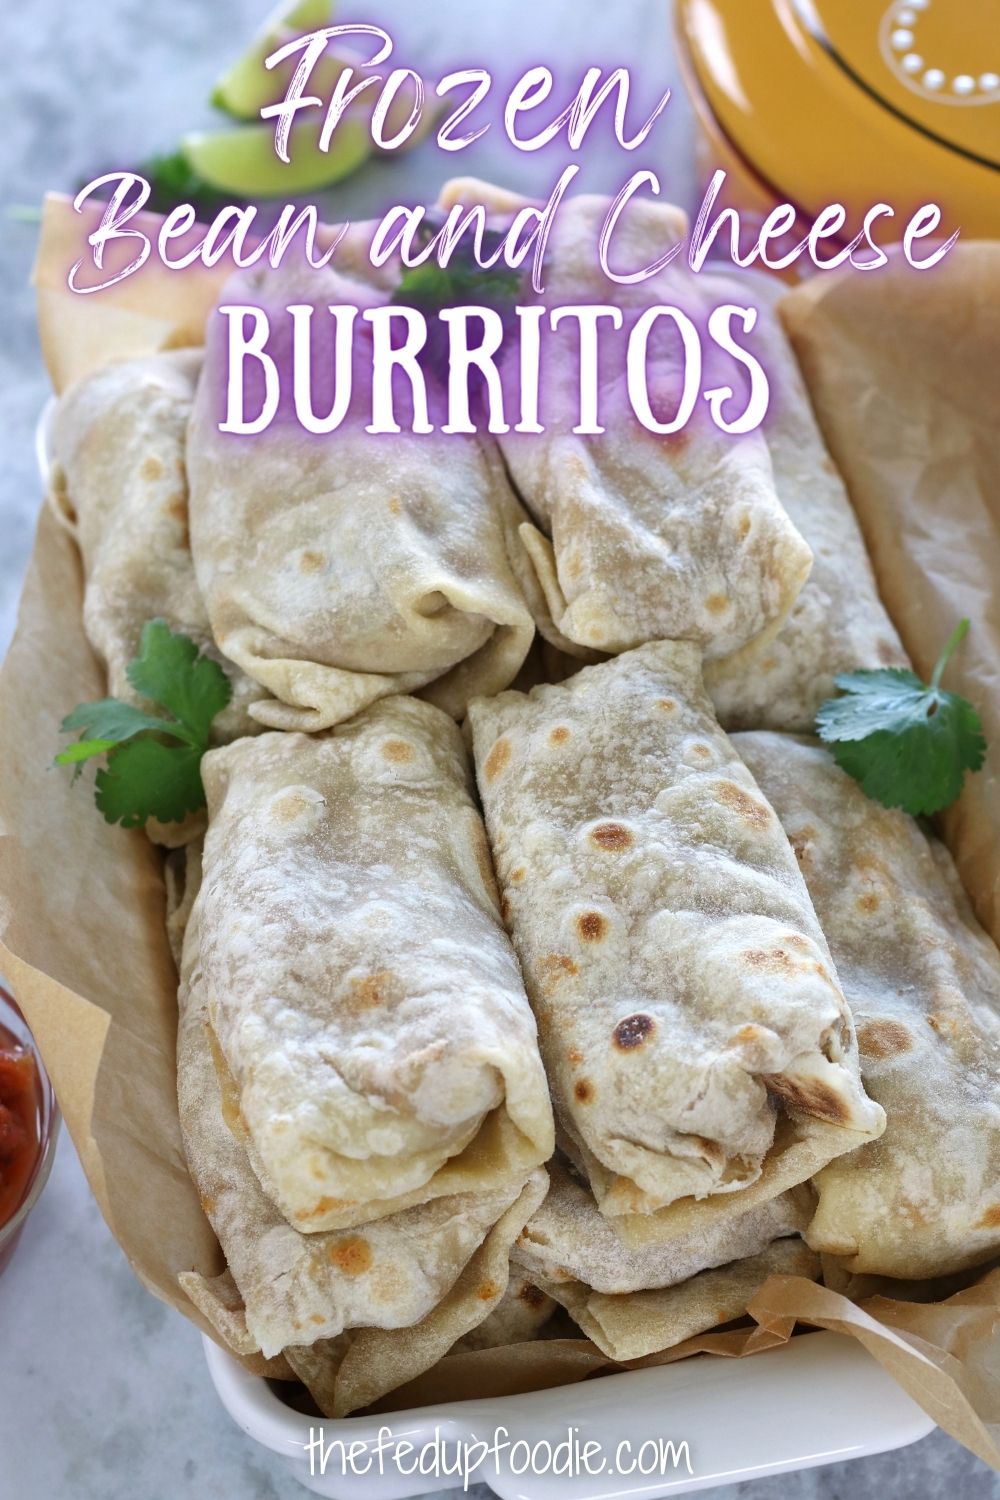 From-scratch Frozen Bean and Cheese Burritos are a delicious make-ahead meal that are extremely budget friendly. These burritos are delicious as a quick and healthy lunch or dinner perfect for busy weeks and is always a staple in our freezer.
#MakeAheadBurritos #MakeAheadBurritosFrozen #FrozenBurritoRecipe #MealPrepBurritos #FreezerLunchesMakeAhead #FreezerDinnerMakeAhead #FreezerMealPrepIdeas #BeanBurritoRecipe